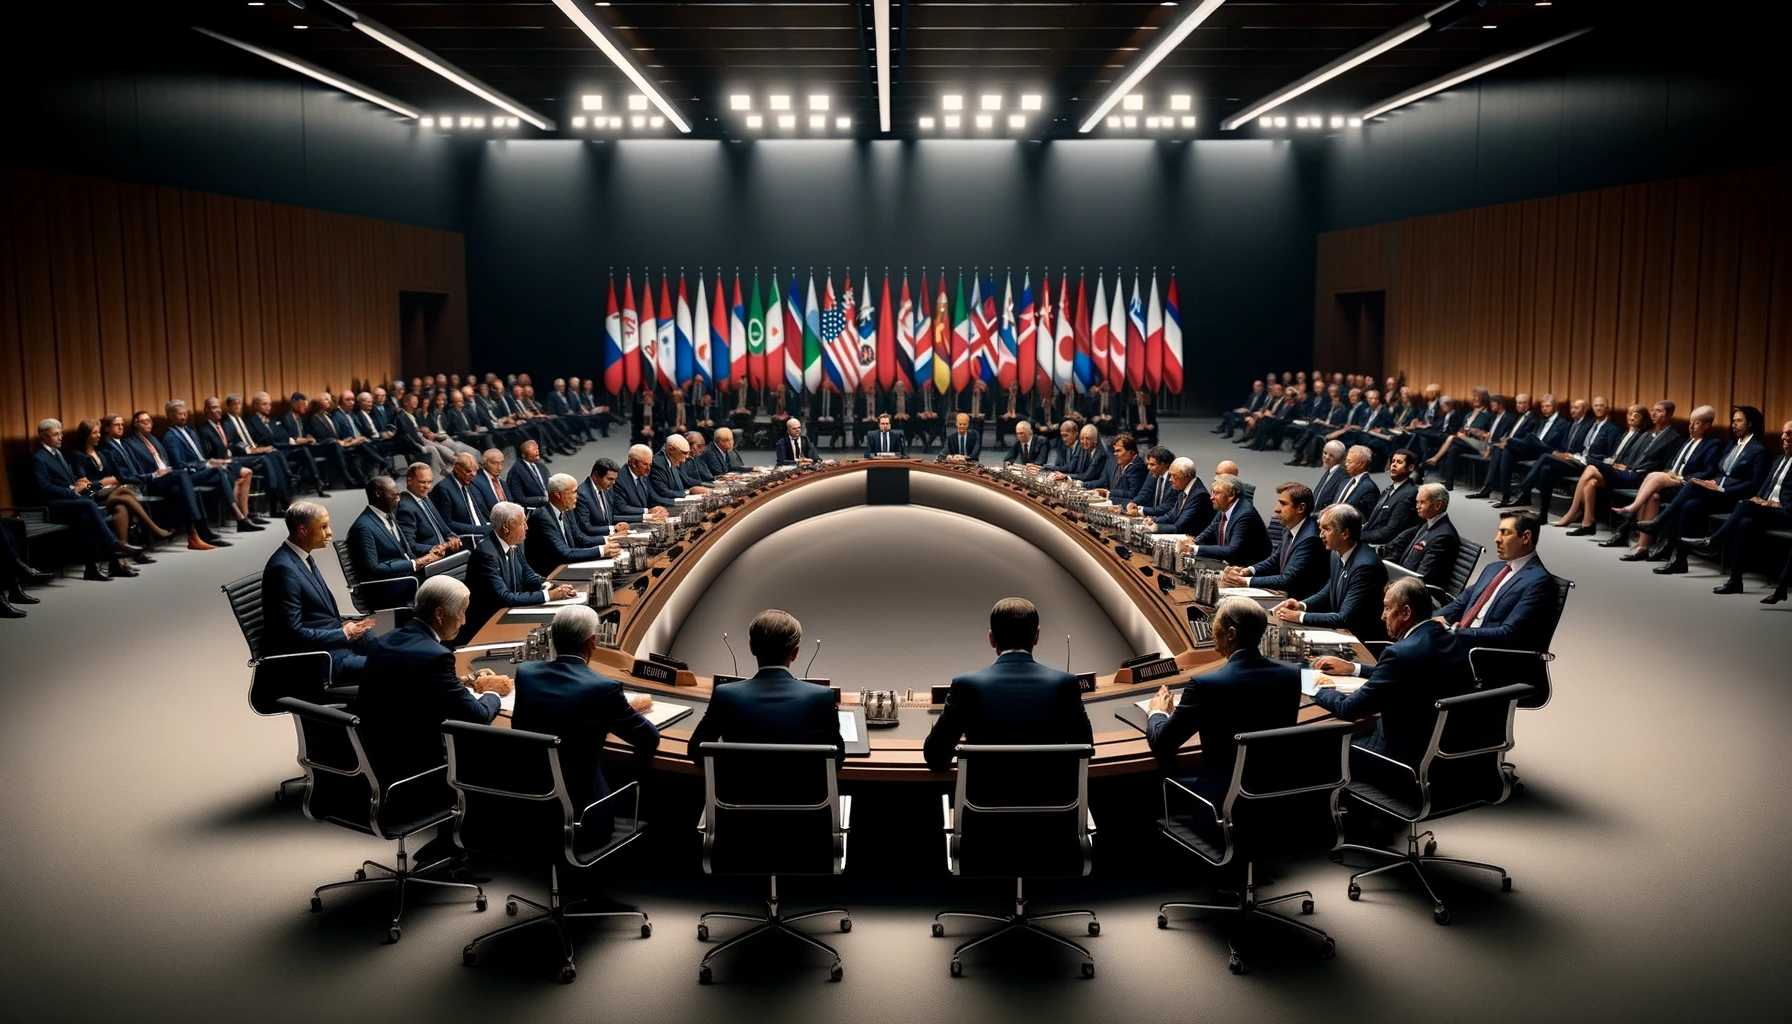 Group of world leaders discussing Russian diamond sanctions at a summit, focusing on their expressions and body language in a formal, flag-adorned conference room.